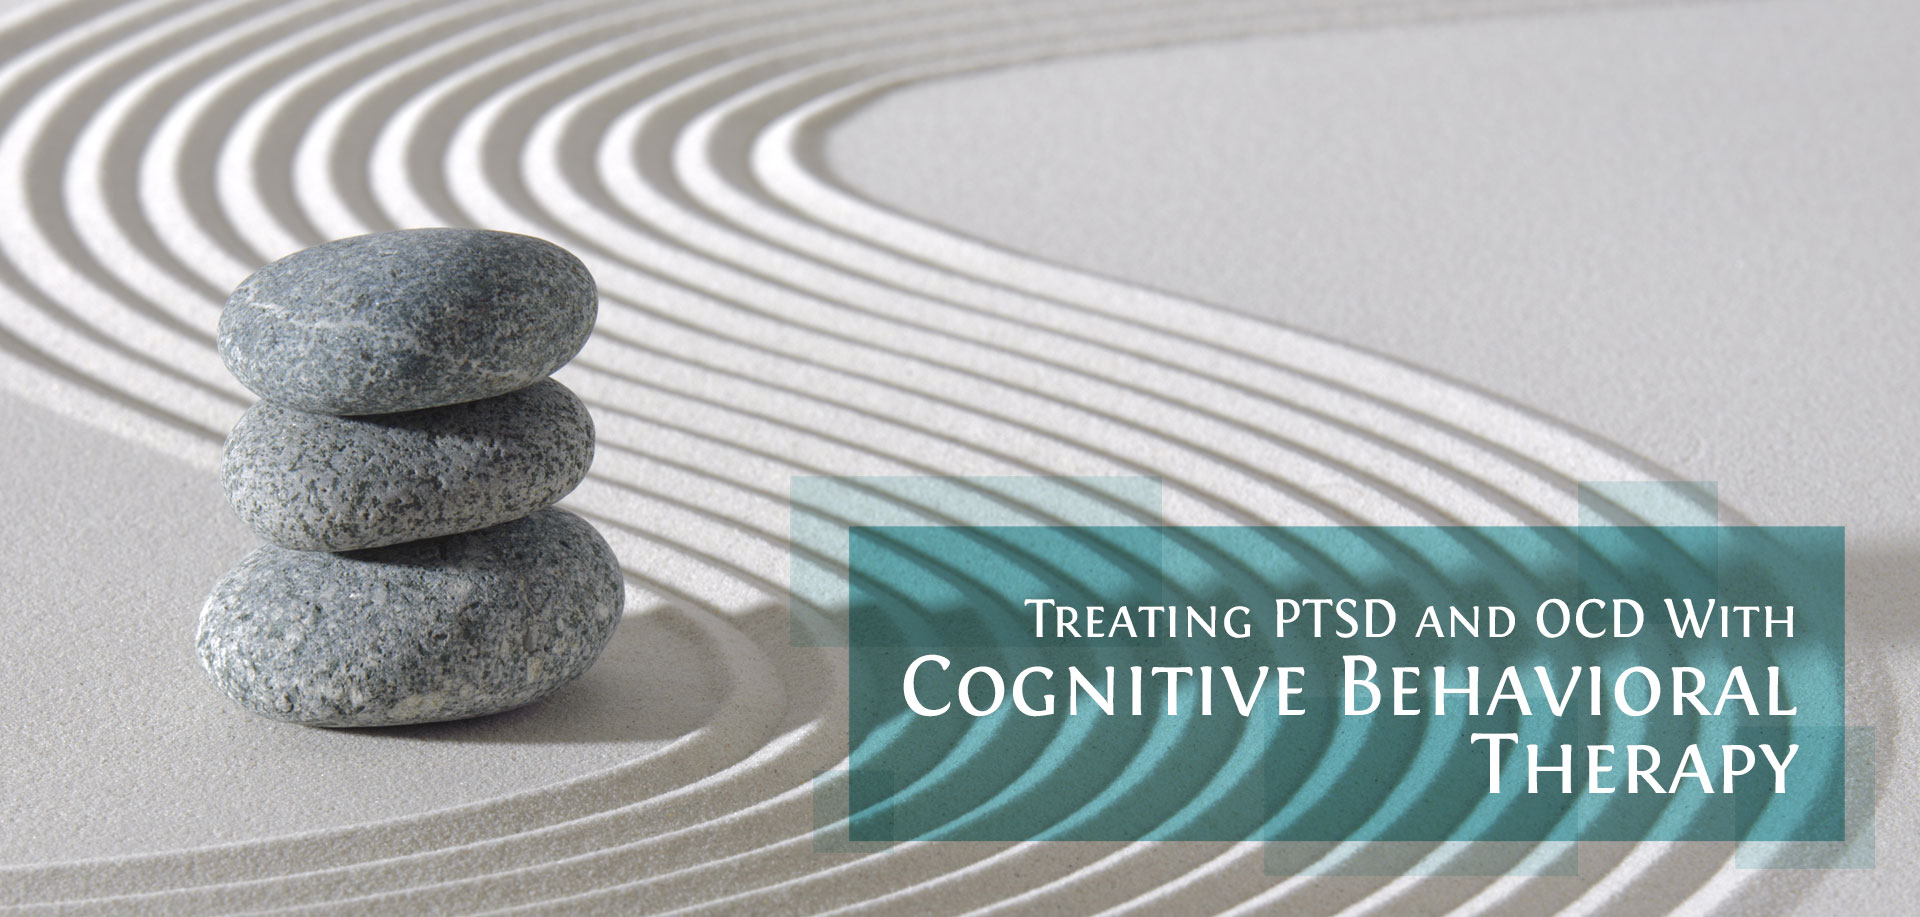 stones on water with text Treating PTSD and OCD With Cognitive Behavioral Therapy